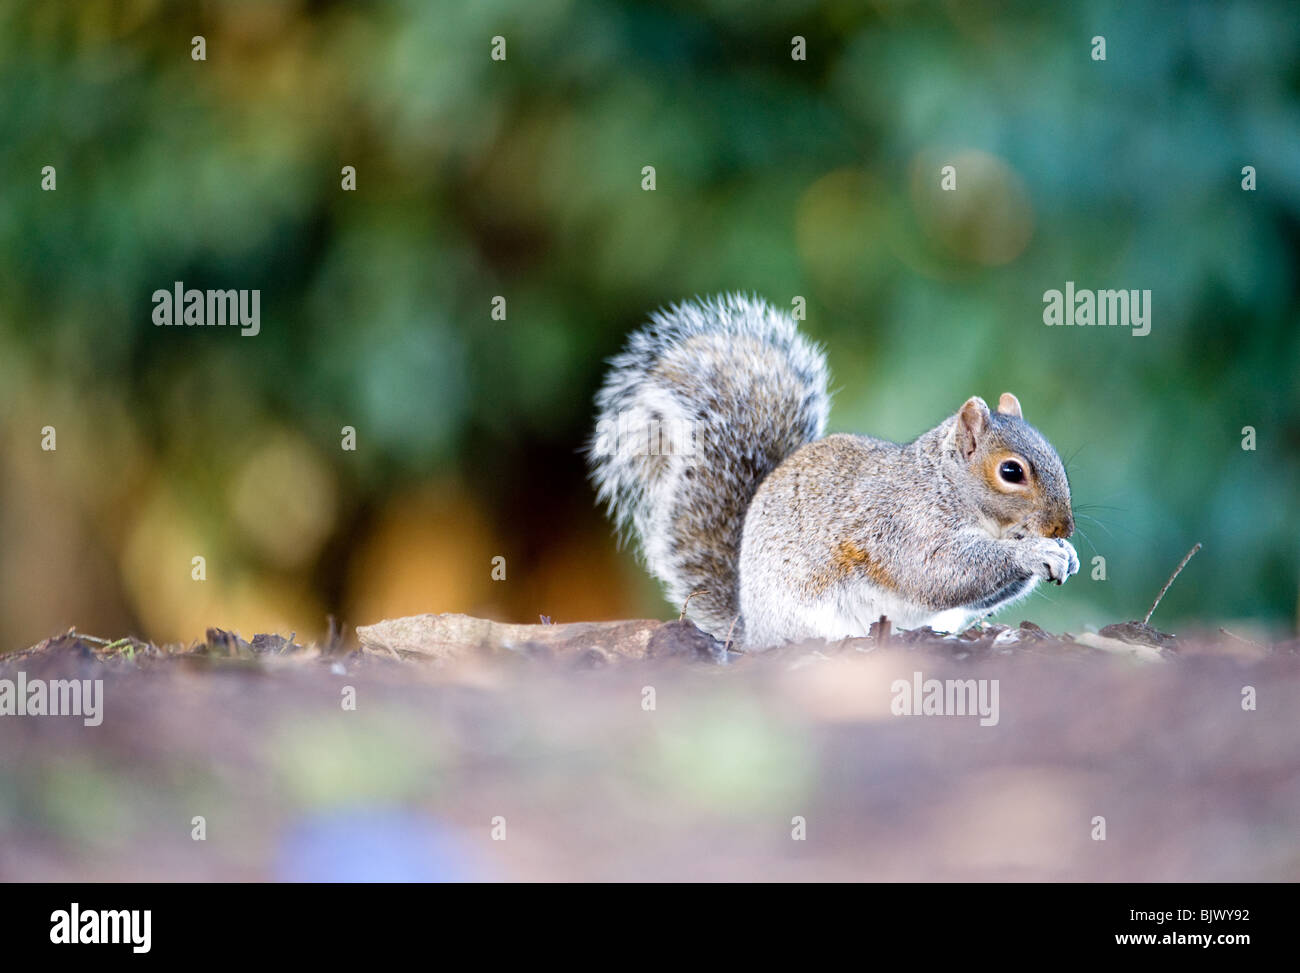 Grey squirrel in English countryside foraging and eating nuts with blurred background in essex park, united Kingdom Stock Photo